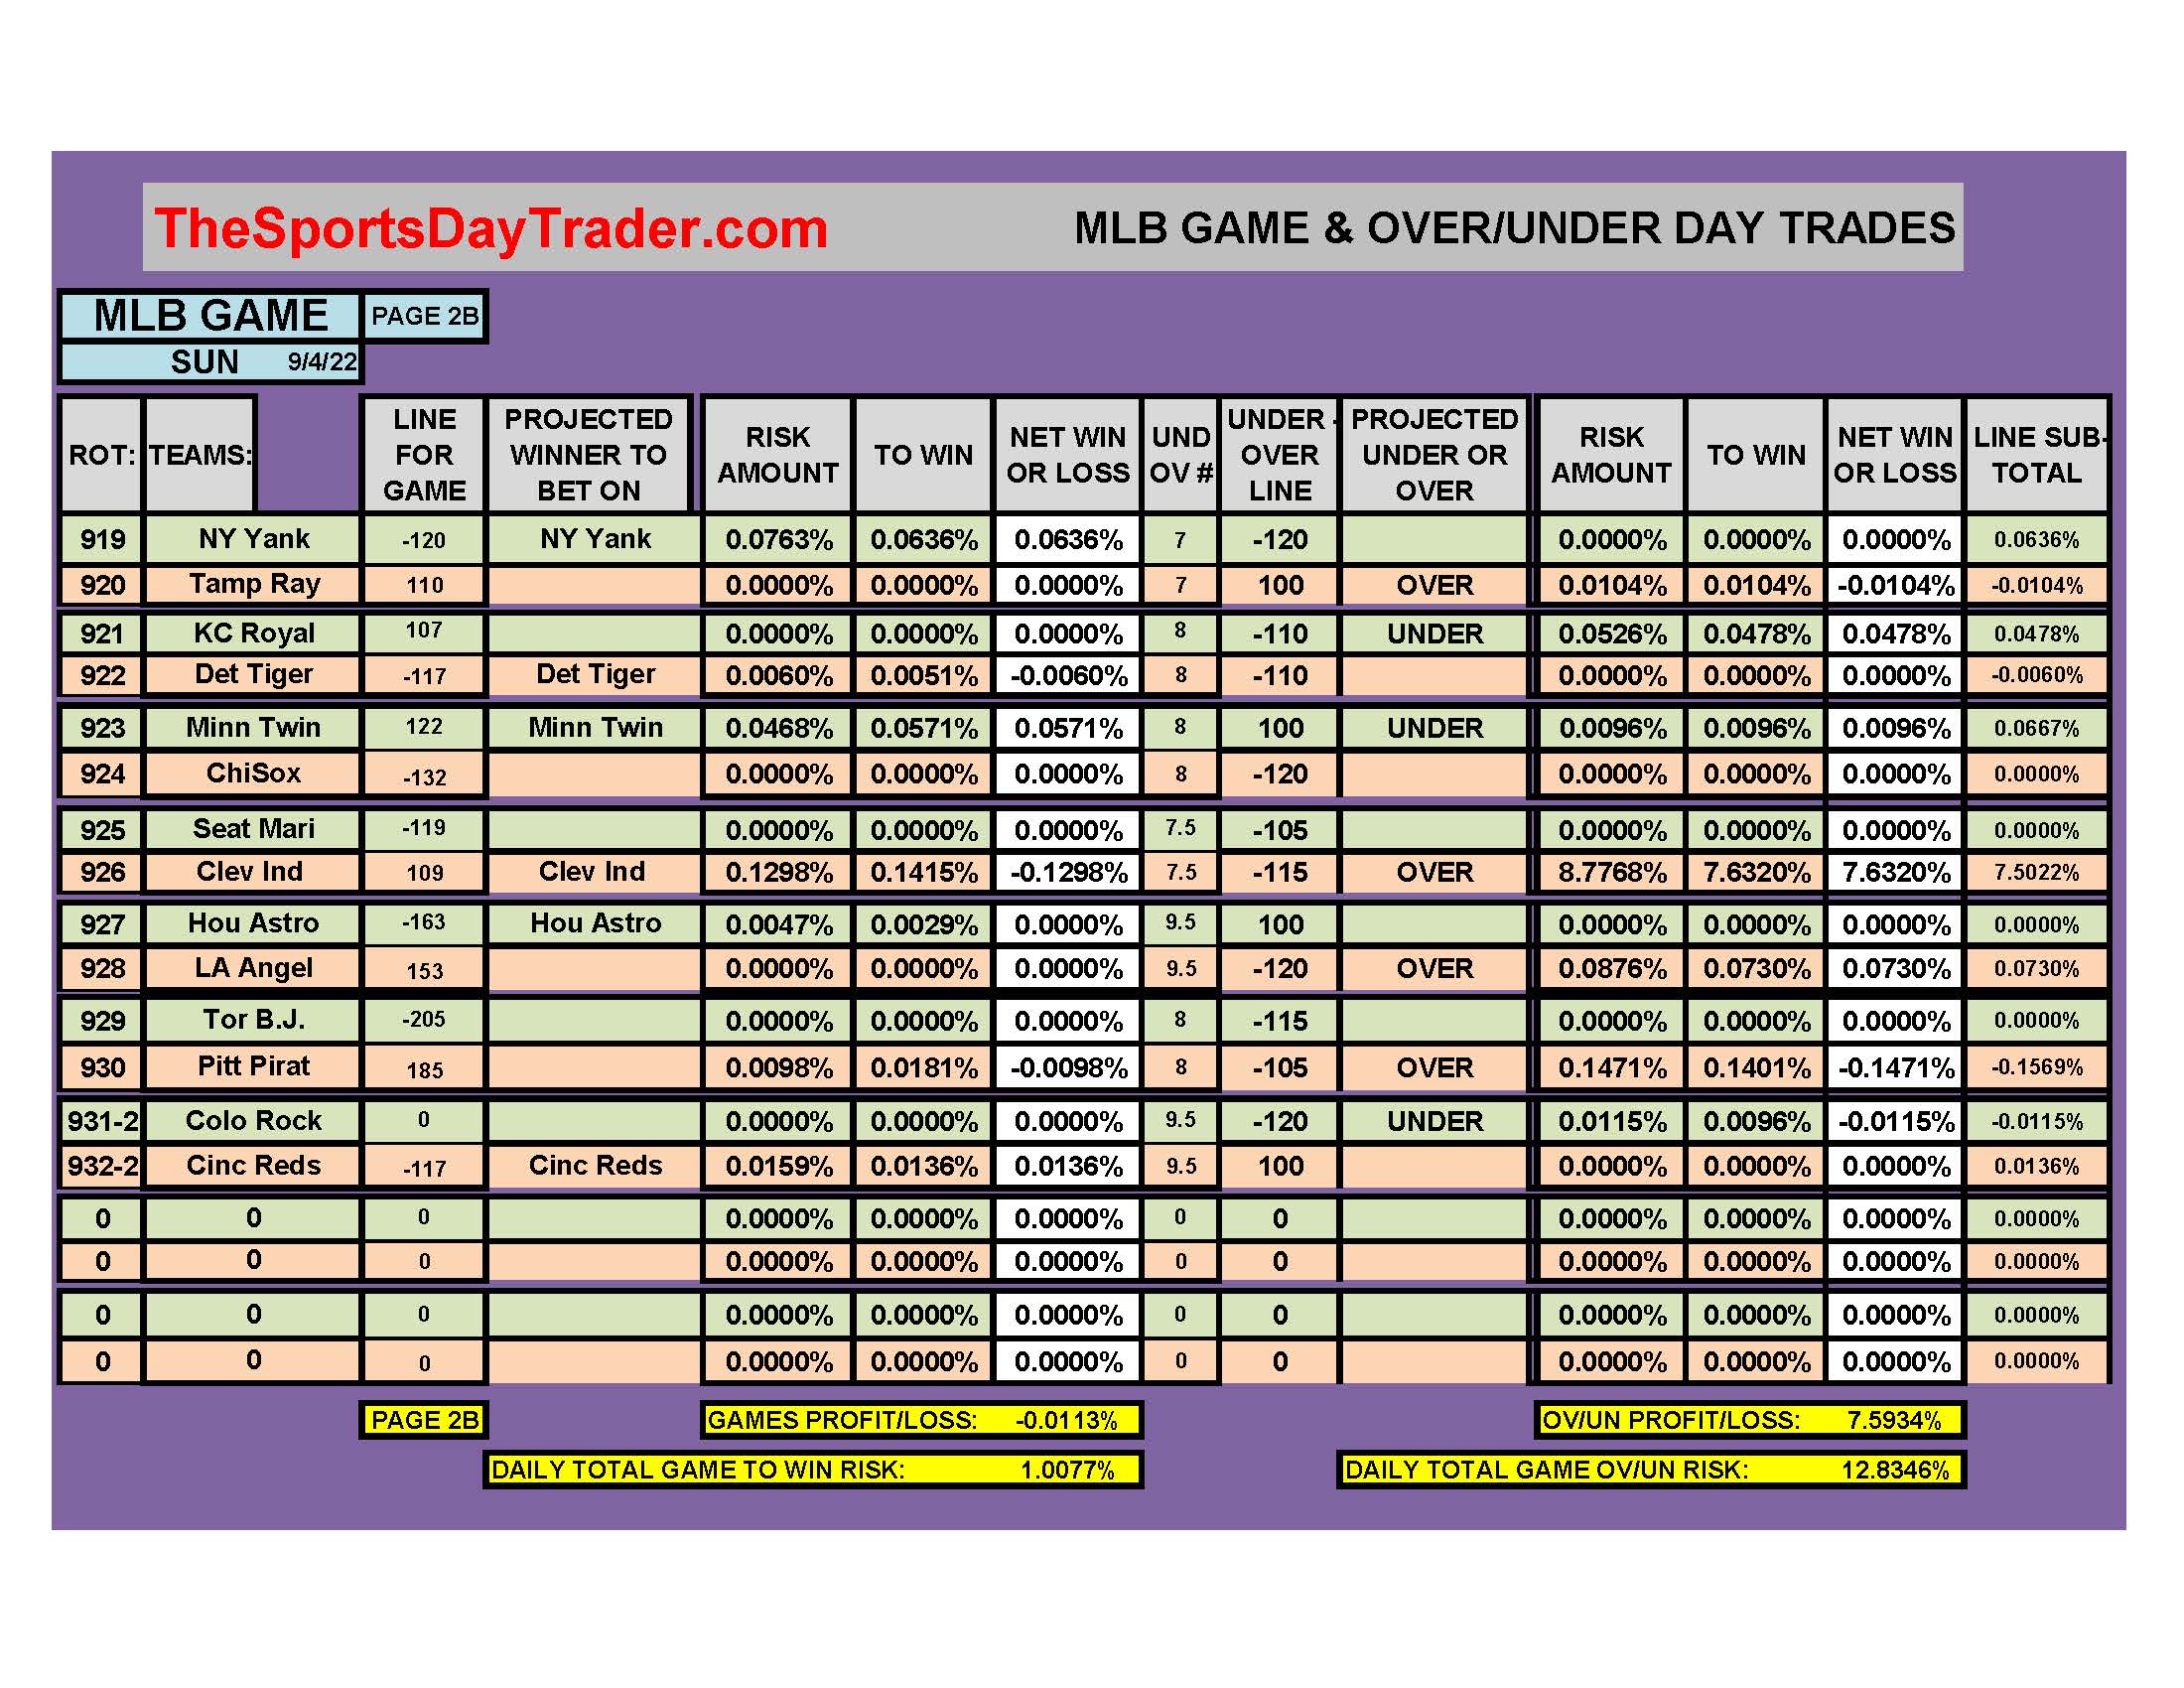 MLB 9/4/22 GAME DAILY RESULTS page 2